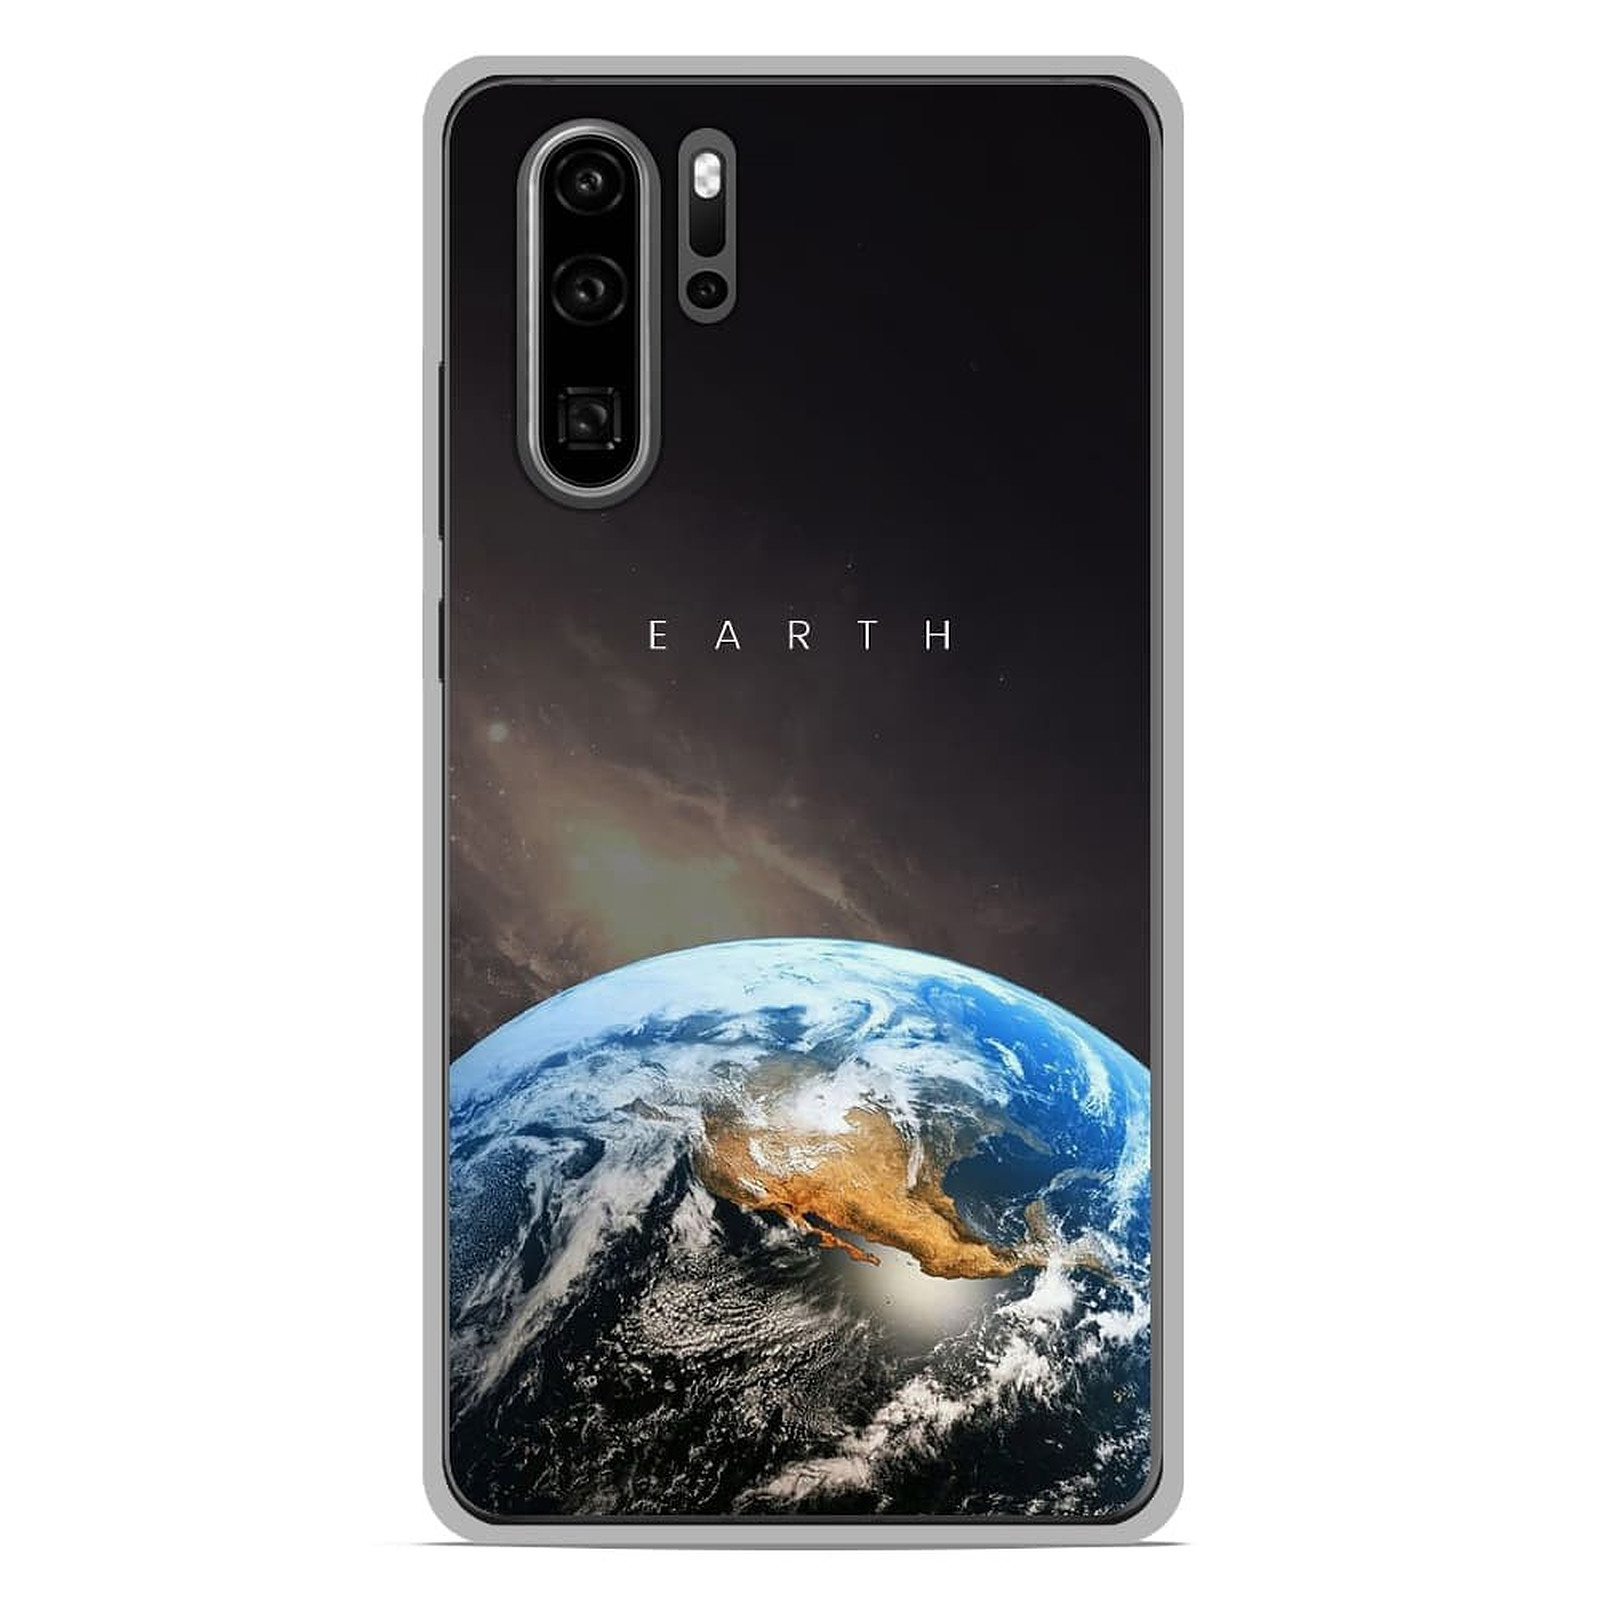 1001 Coques Coque silicone gel Huawei P30 Pro motif Earth - Coque telephone 1001Coques